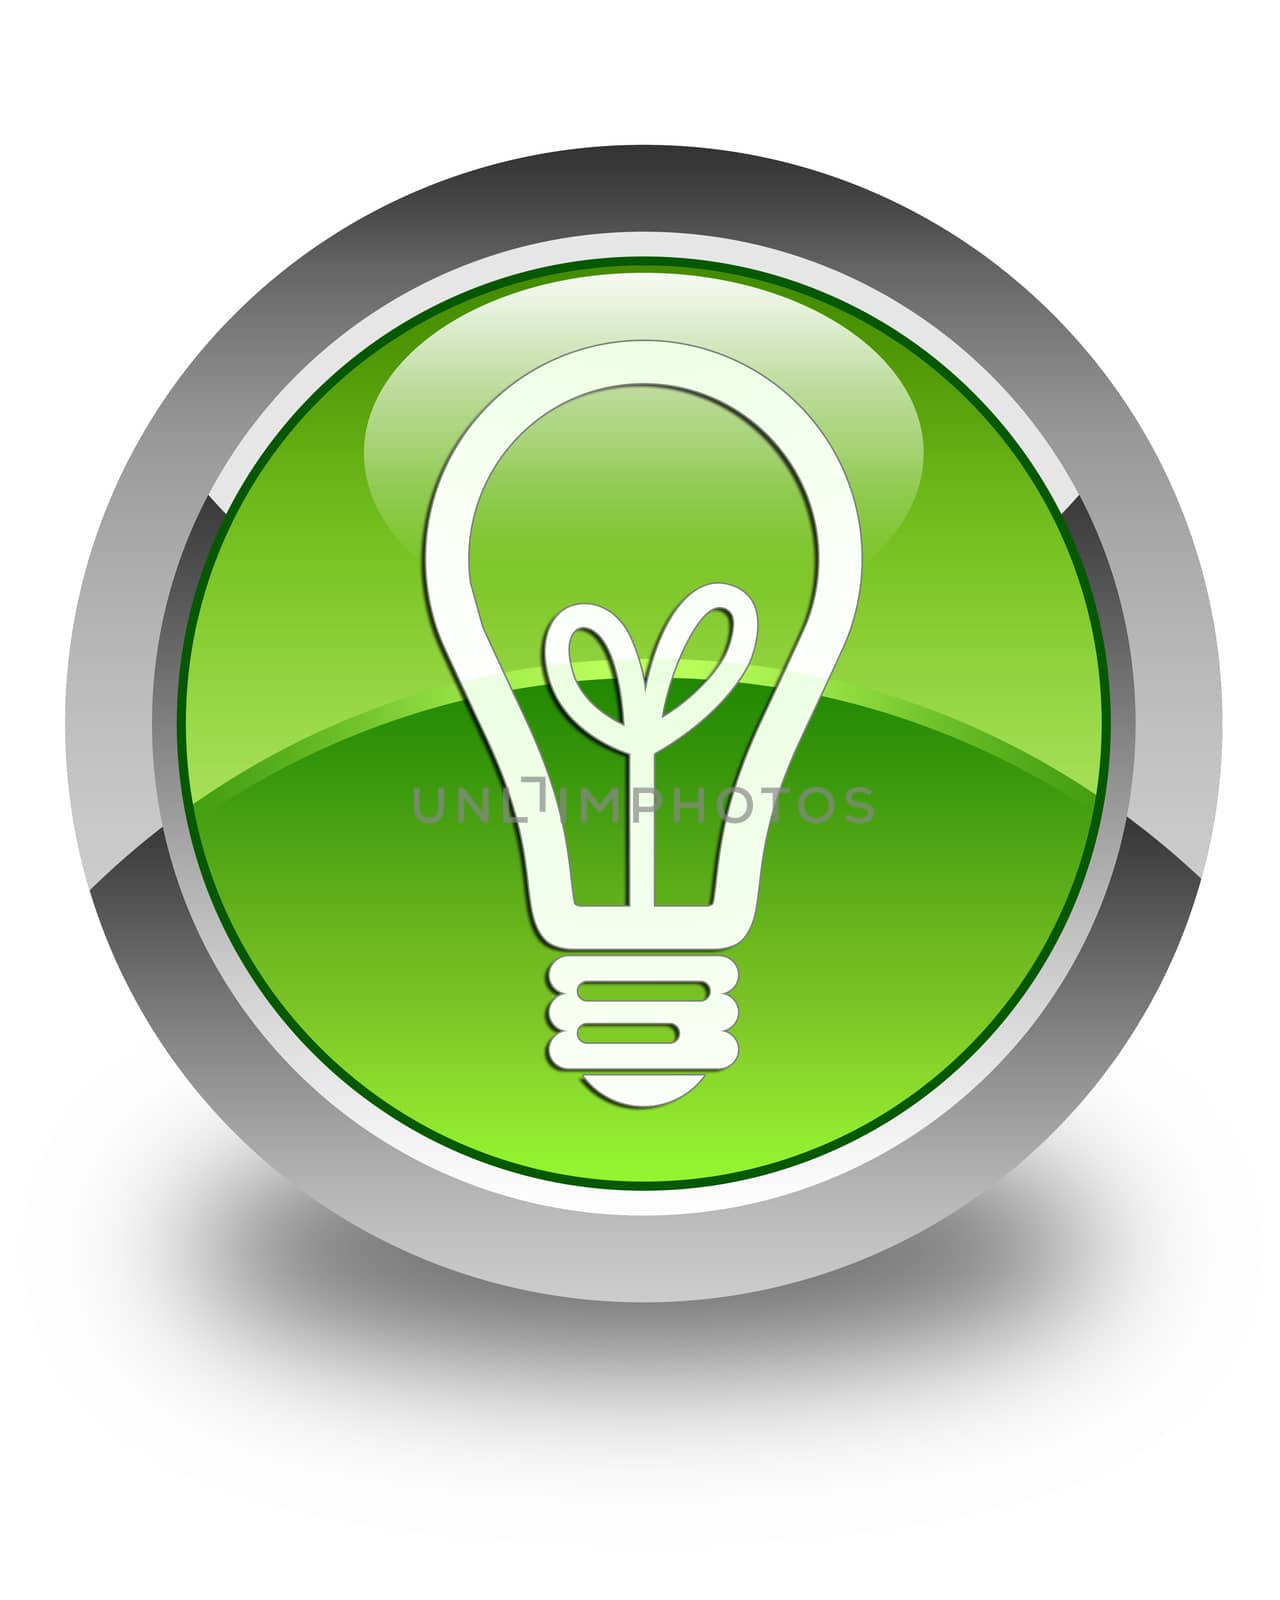 Light bulb icon on glossy green round button